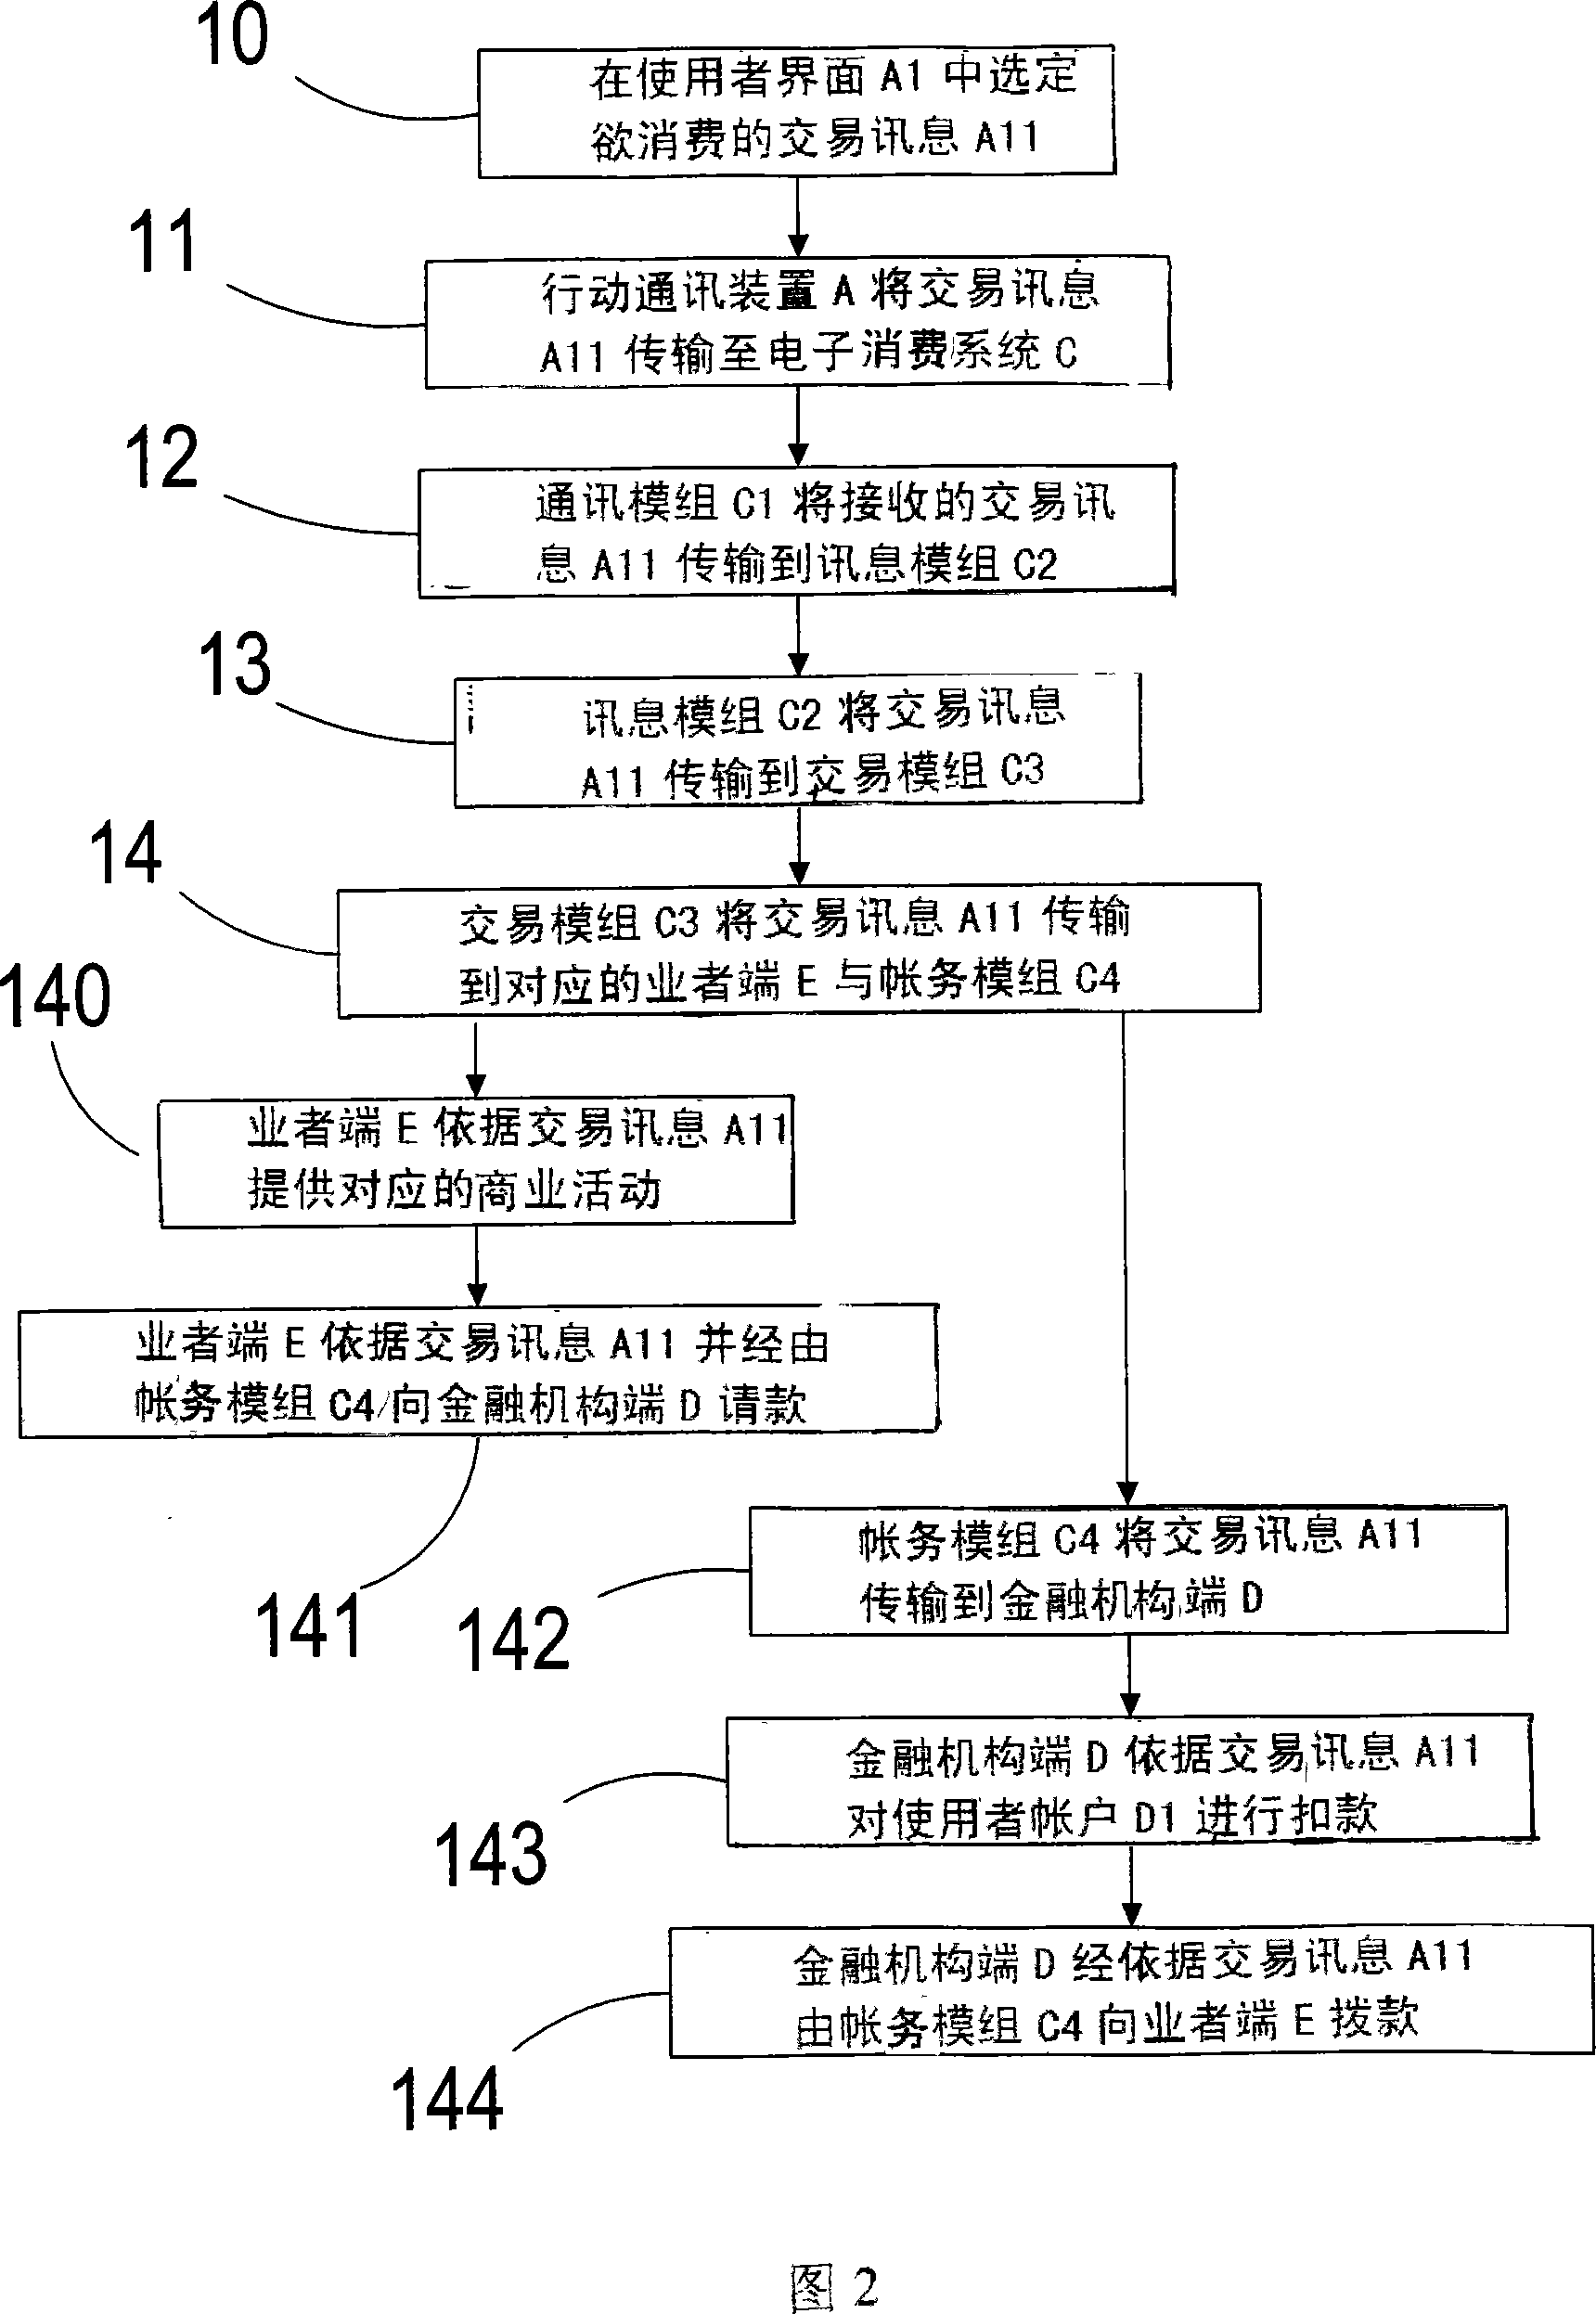 Mobile communication device electronic consumption system